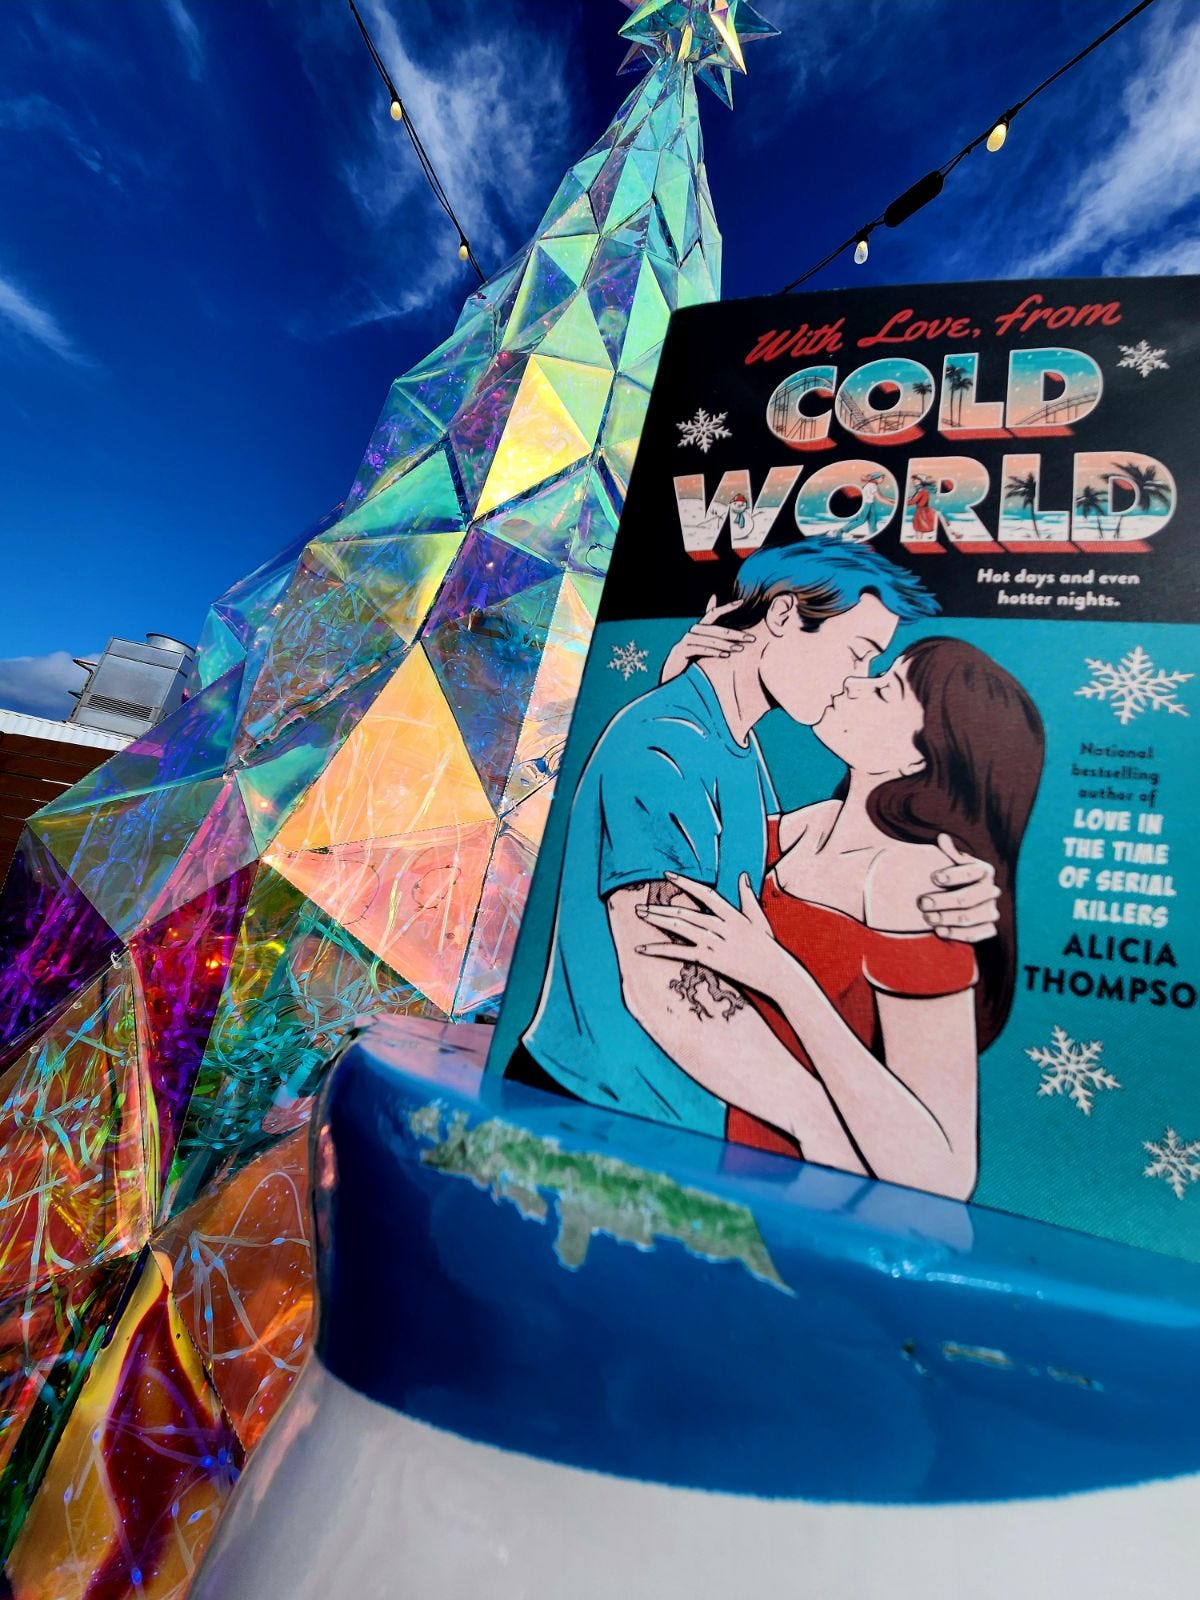 A copy of the teal cover copy of WITH LOVE, FROM COLD WORLD in front of an iridescent Christmas tree